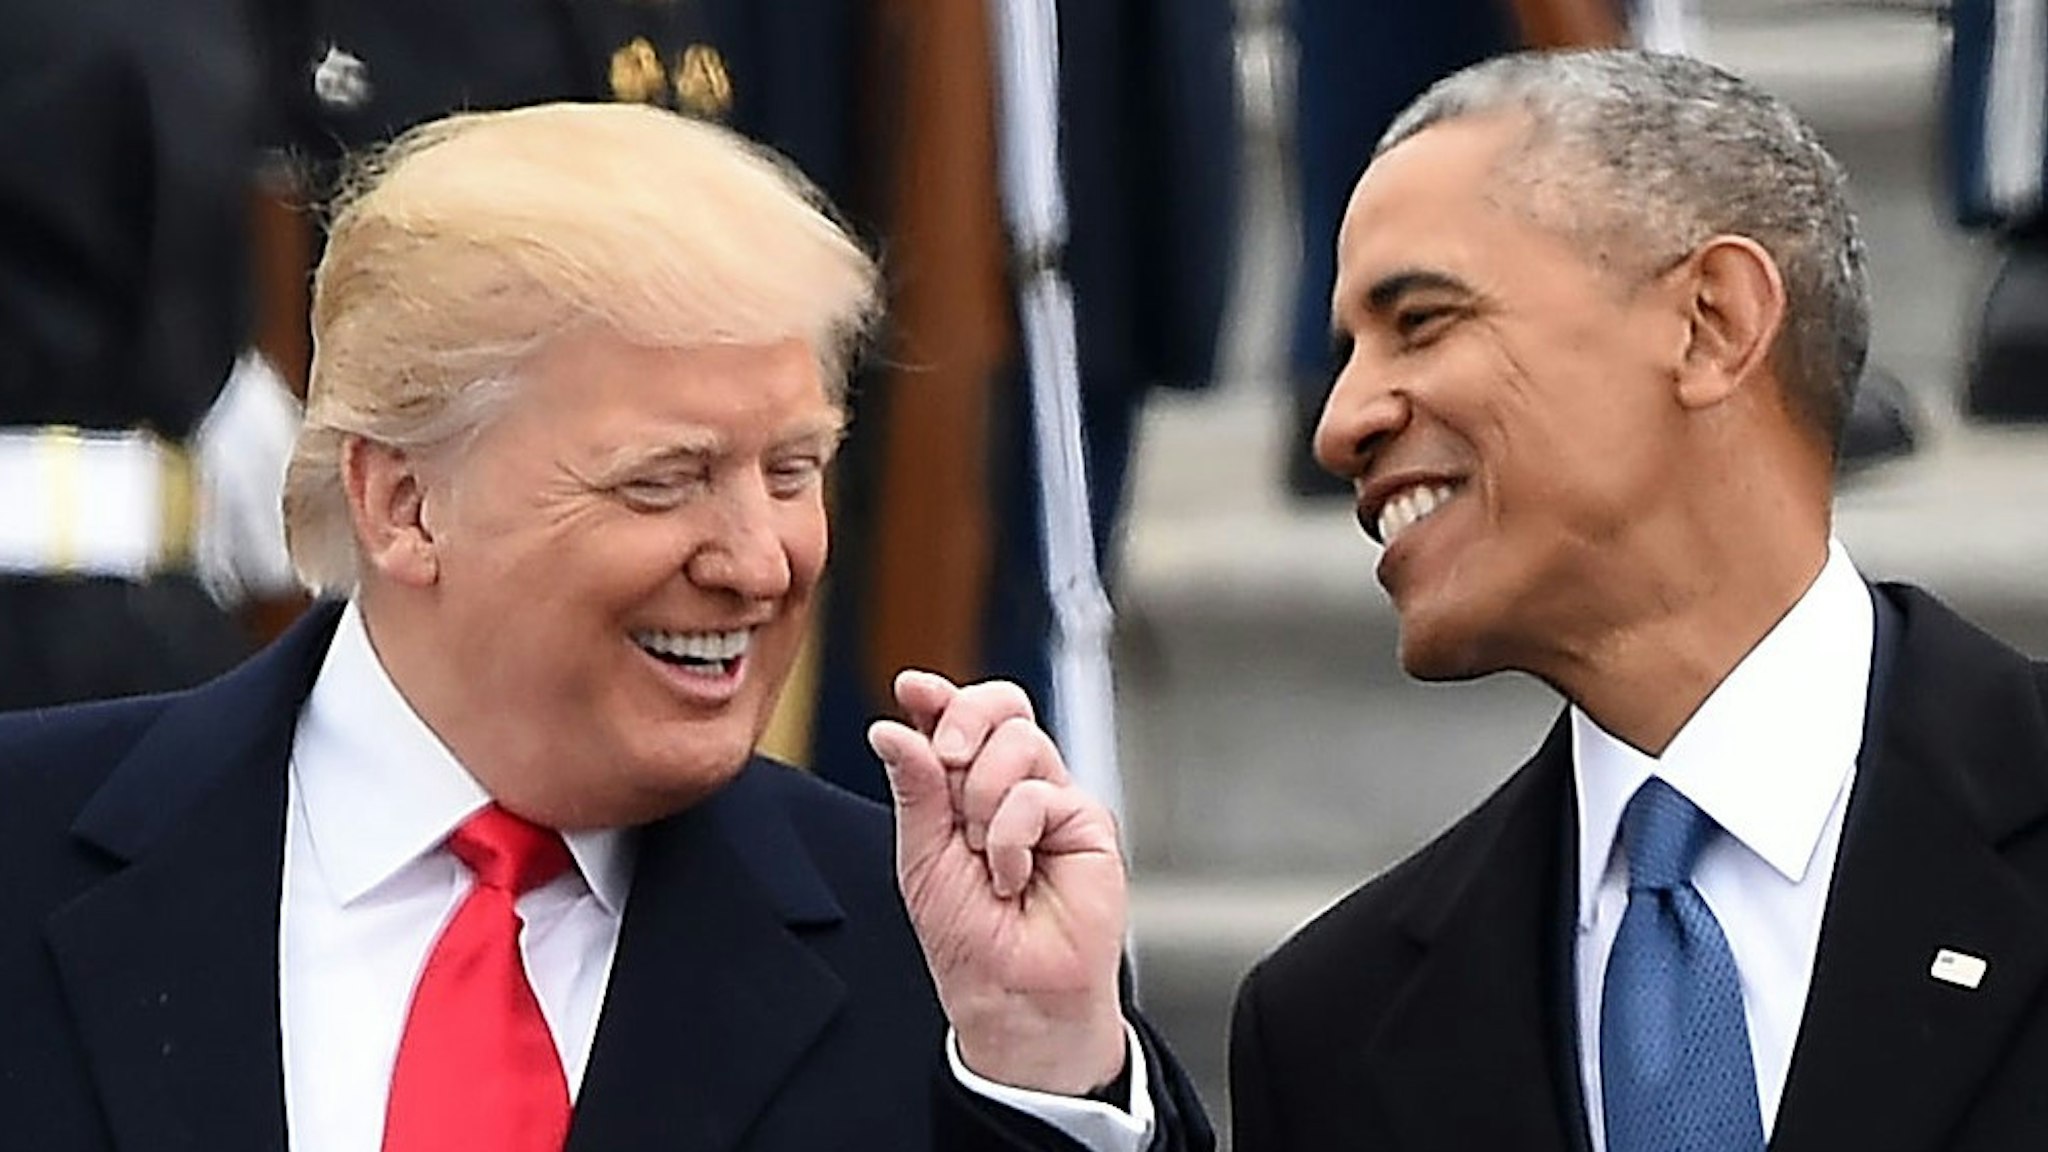 US President Donald Trump and former President Barack Obama talk on the East steps of the US Capitol after inauguration ceremonies on January 20, 2017, in Washington, DC. / AFP / Robyn BECK (Photo credit should read